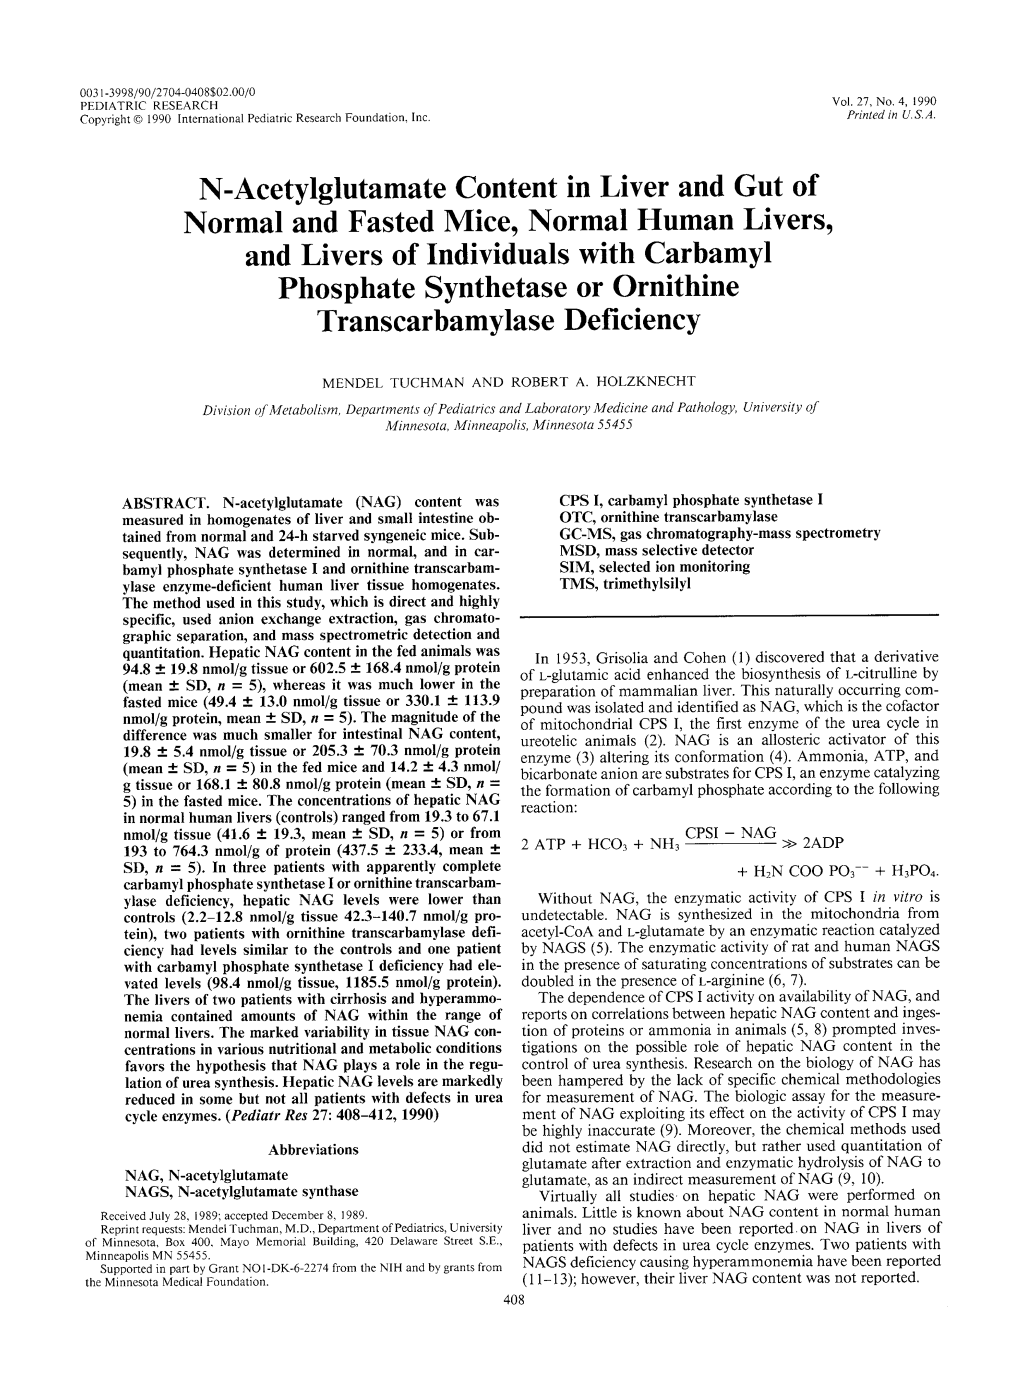 N-Acetylglutamate Content in Liver and Gut of Normal and Fasted Mice, Normal Human Livers, and Livers of Individuals with Carbam